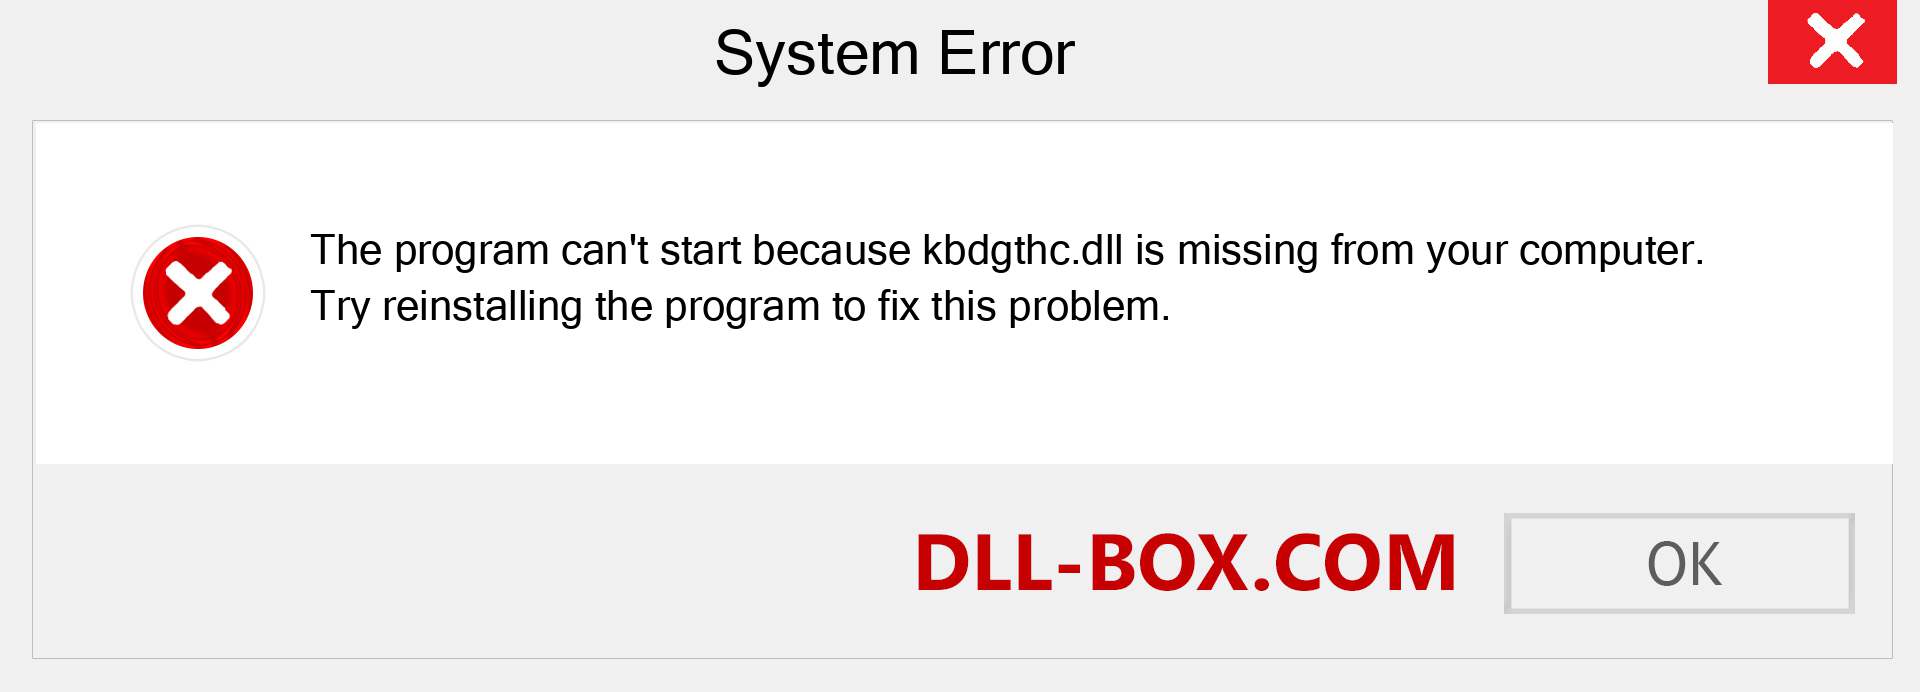  kbdgthc.dll file is missing?. Download for Windows 7, 8, 10 - Fix  kbdgthc dll Missing Error on Windows, photos, images